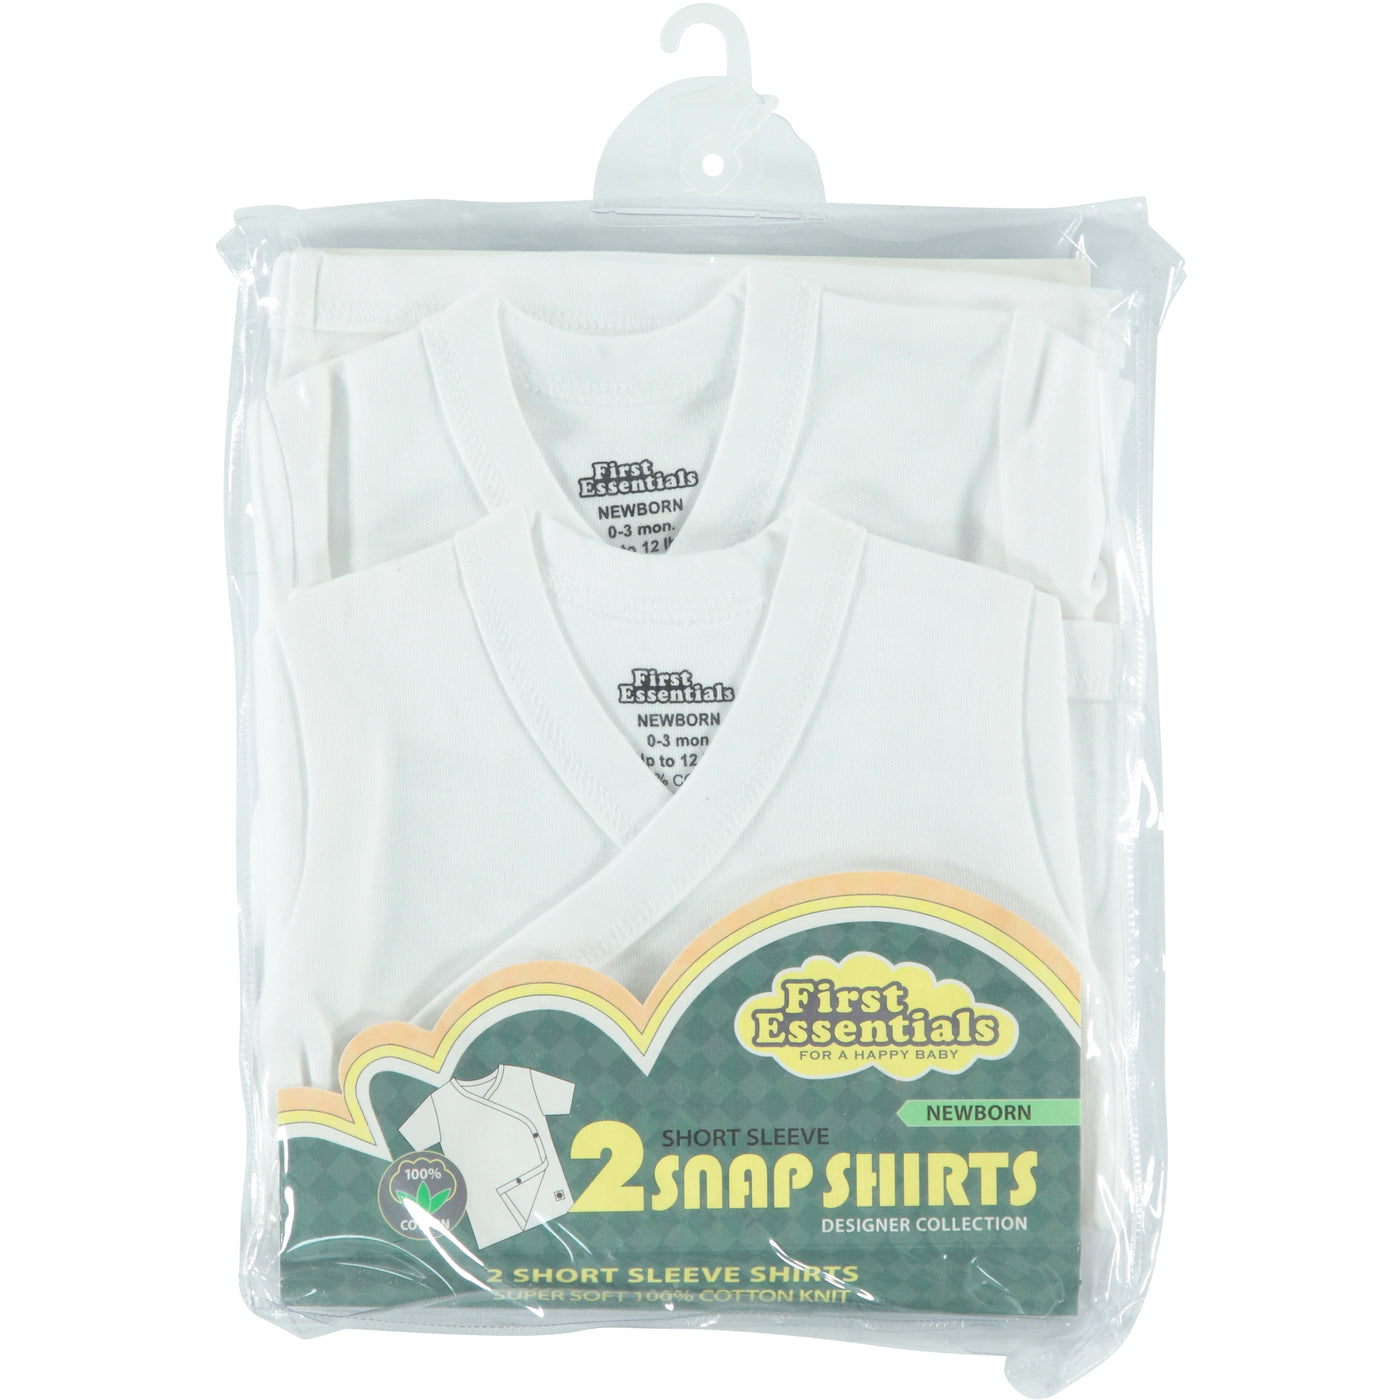 First Essentials Two-Pack Side Wrap Half-Height Short Sleeve White Undershirts